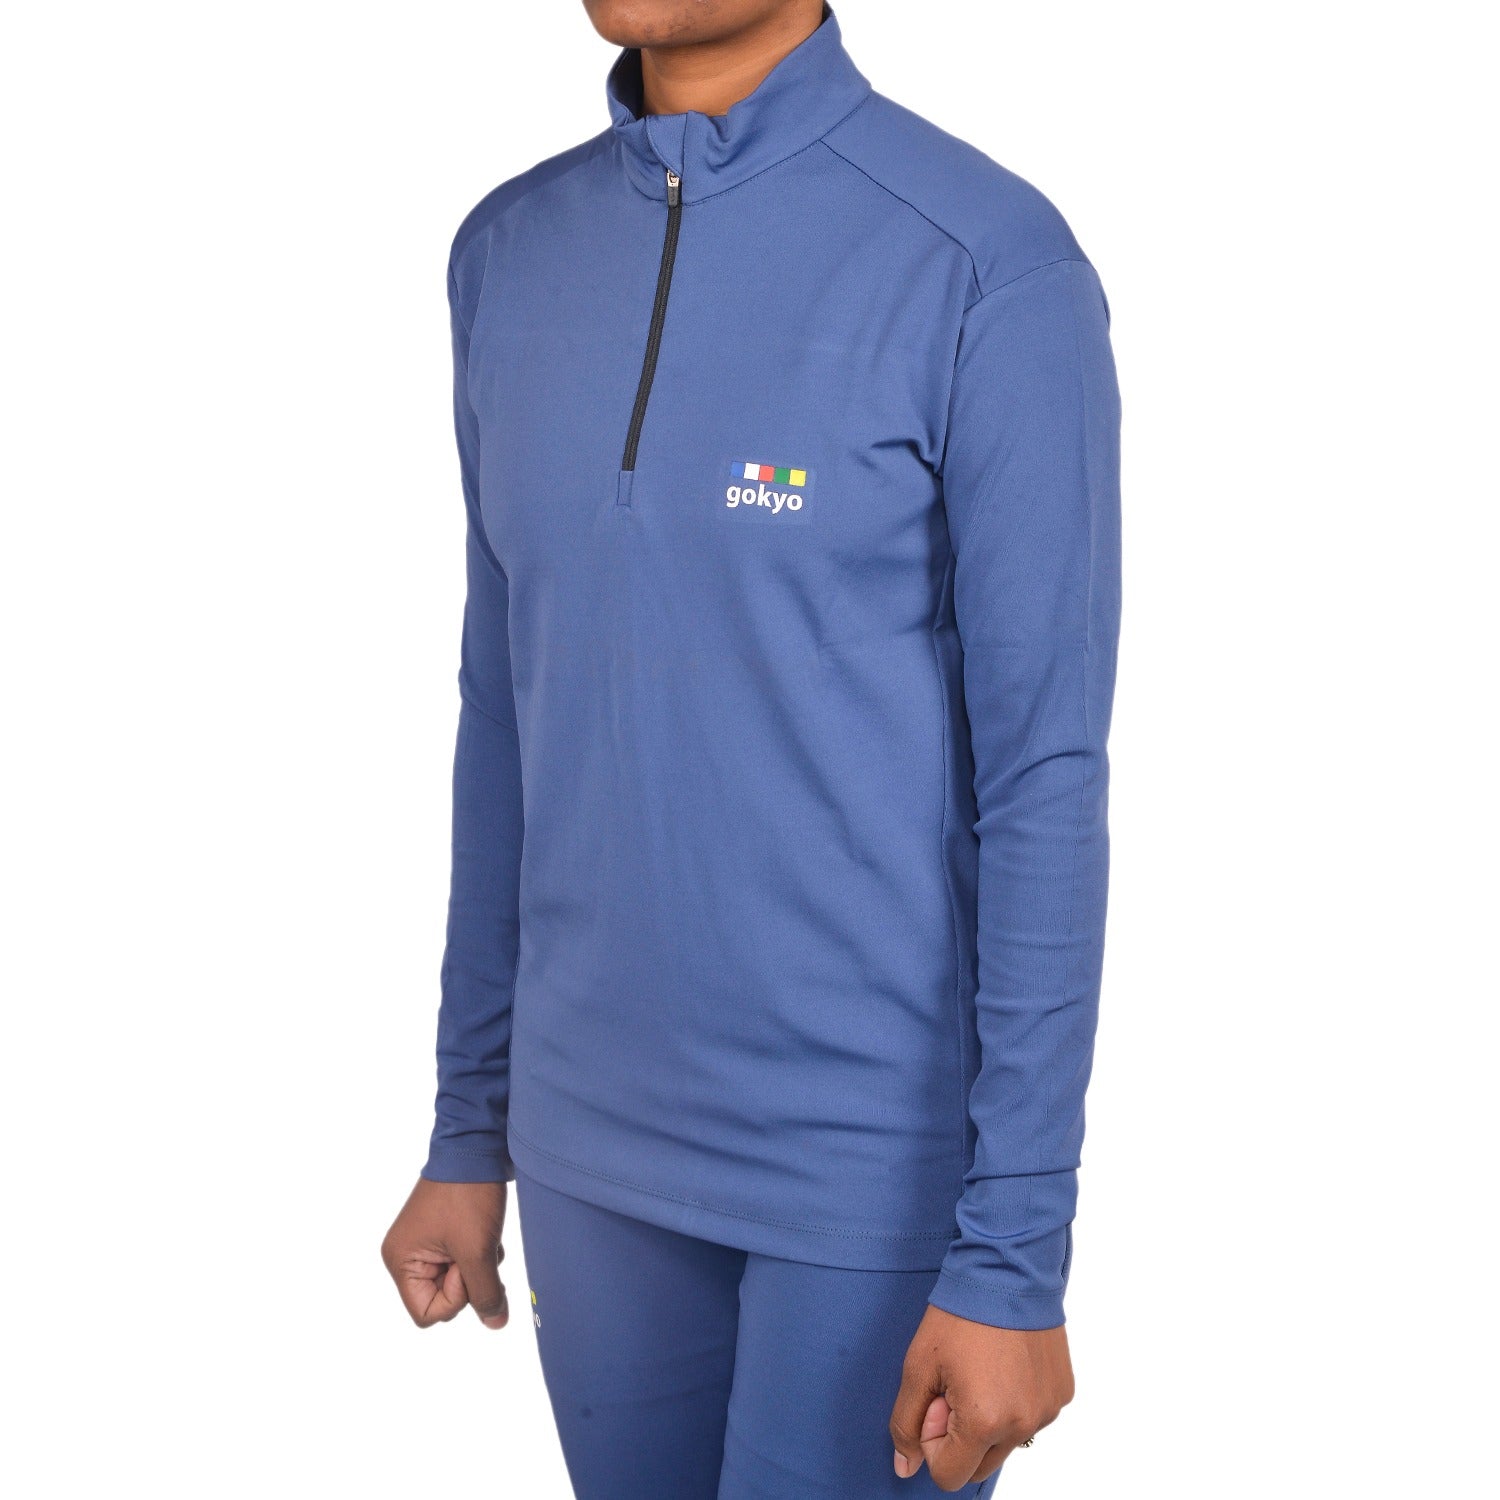 Buy K2 Base Layer Thermals Top - Women at Gokyo Outdoor Clothing & Gear